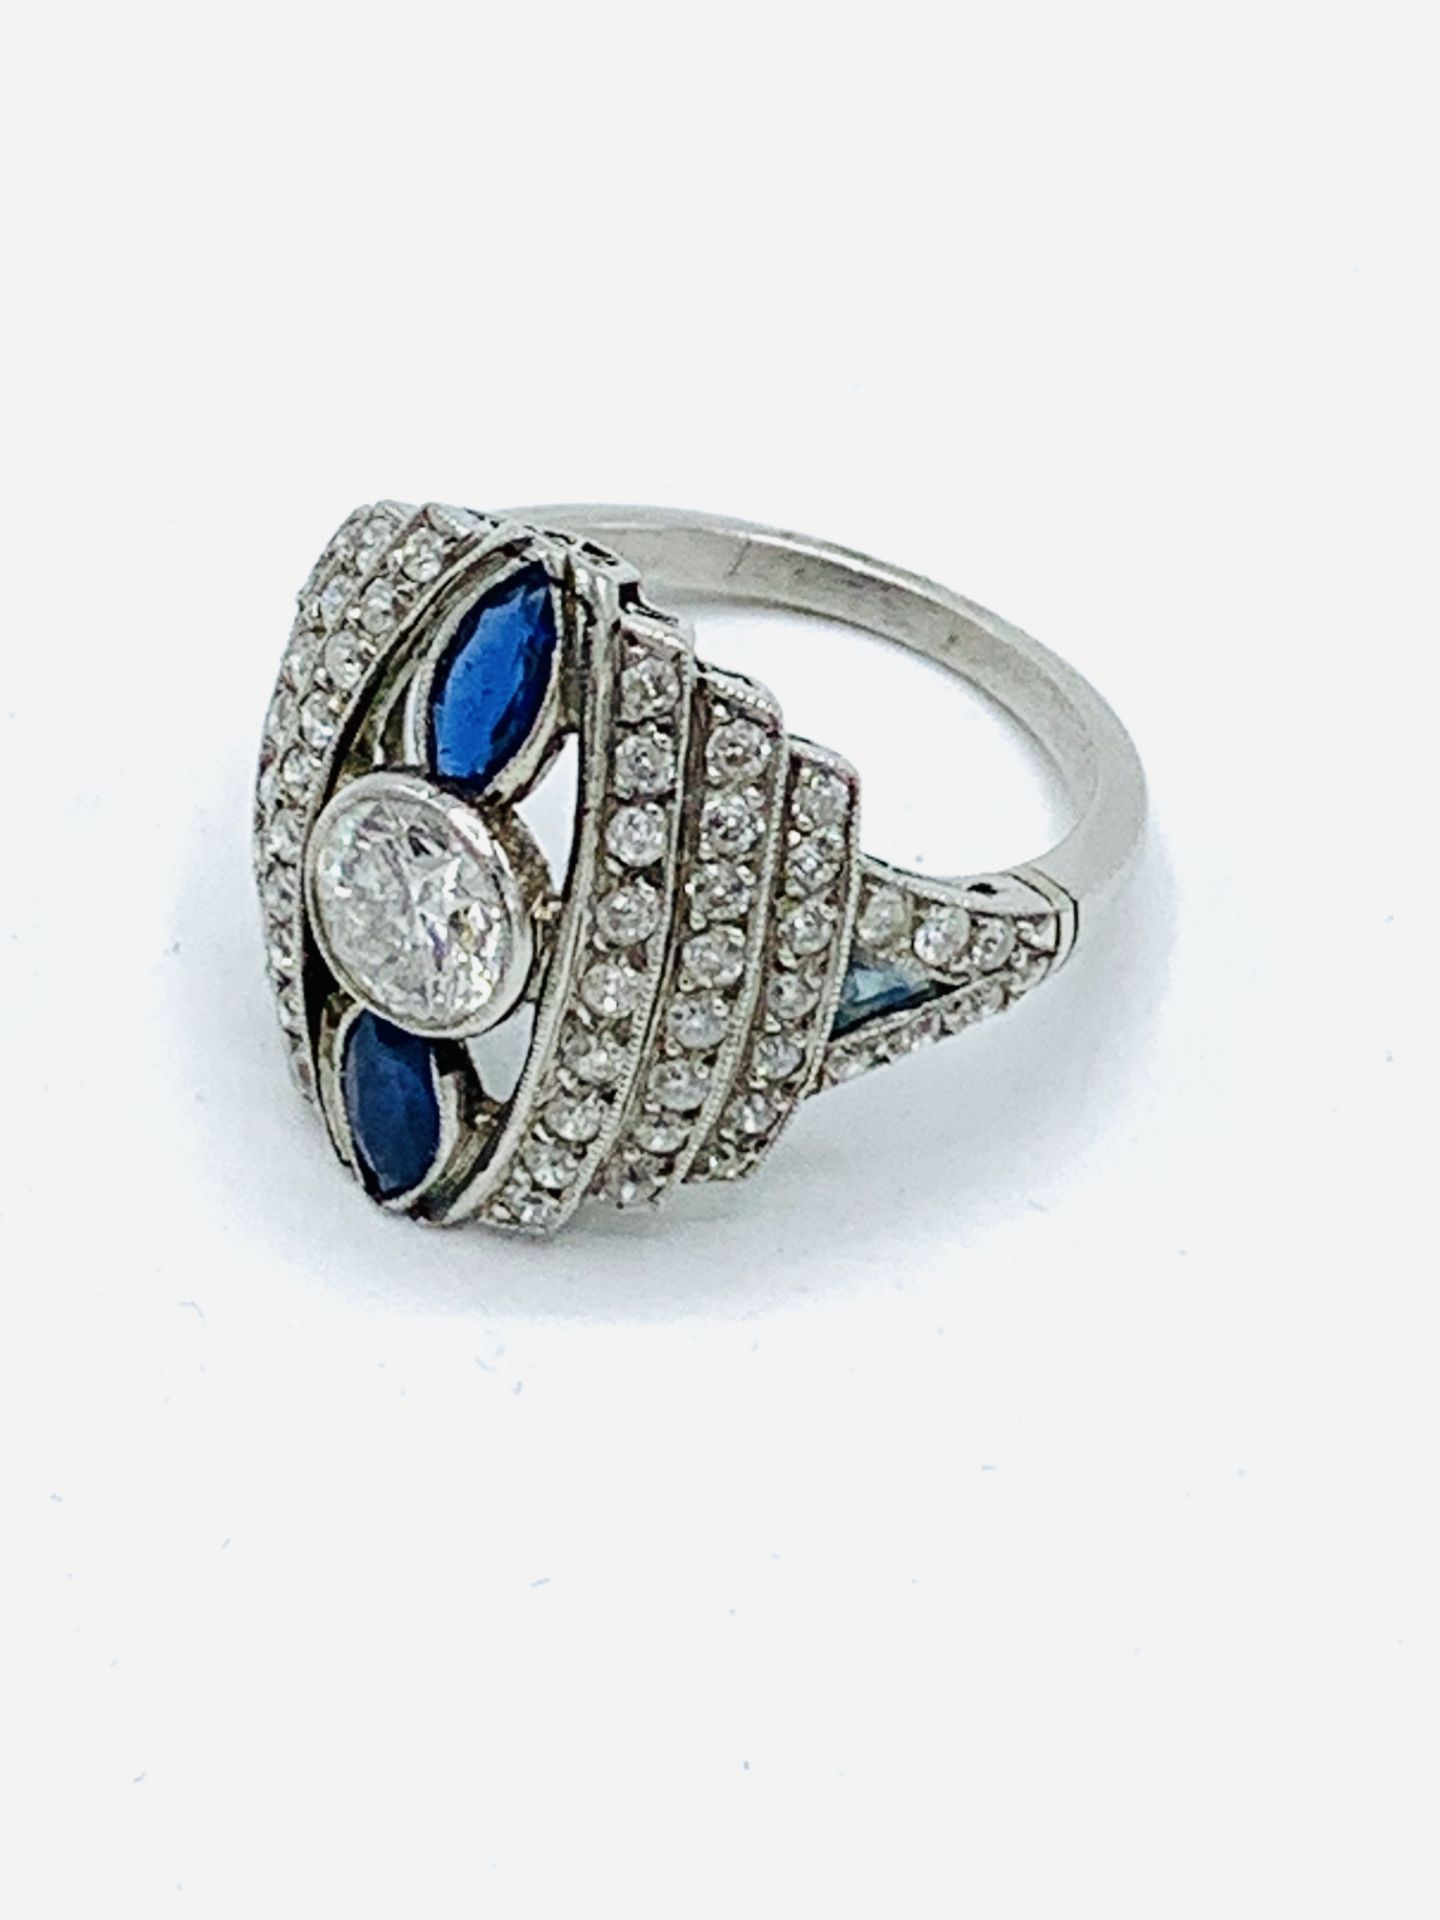 Art Deco white gold diamond and sapphire ring. Size O 1/2 Wt. 7.8gms. Size of centre diamond 6.3m - Image 3 of 7